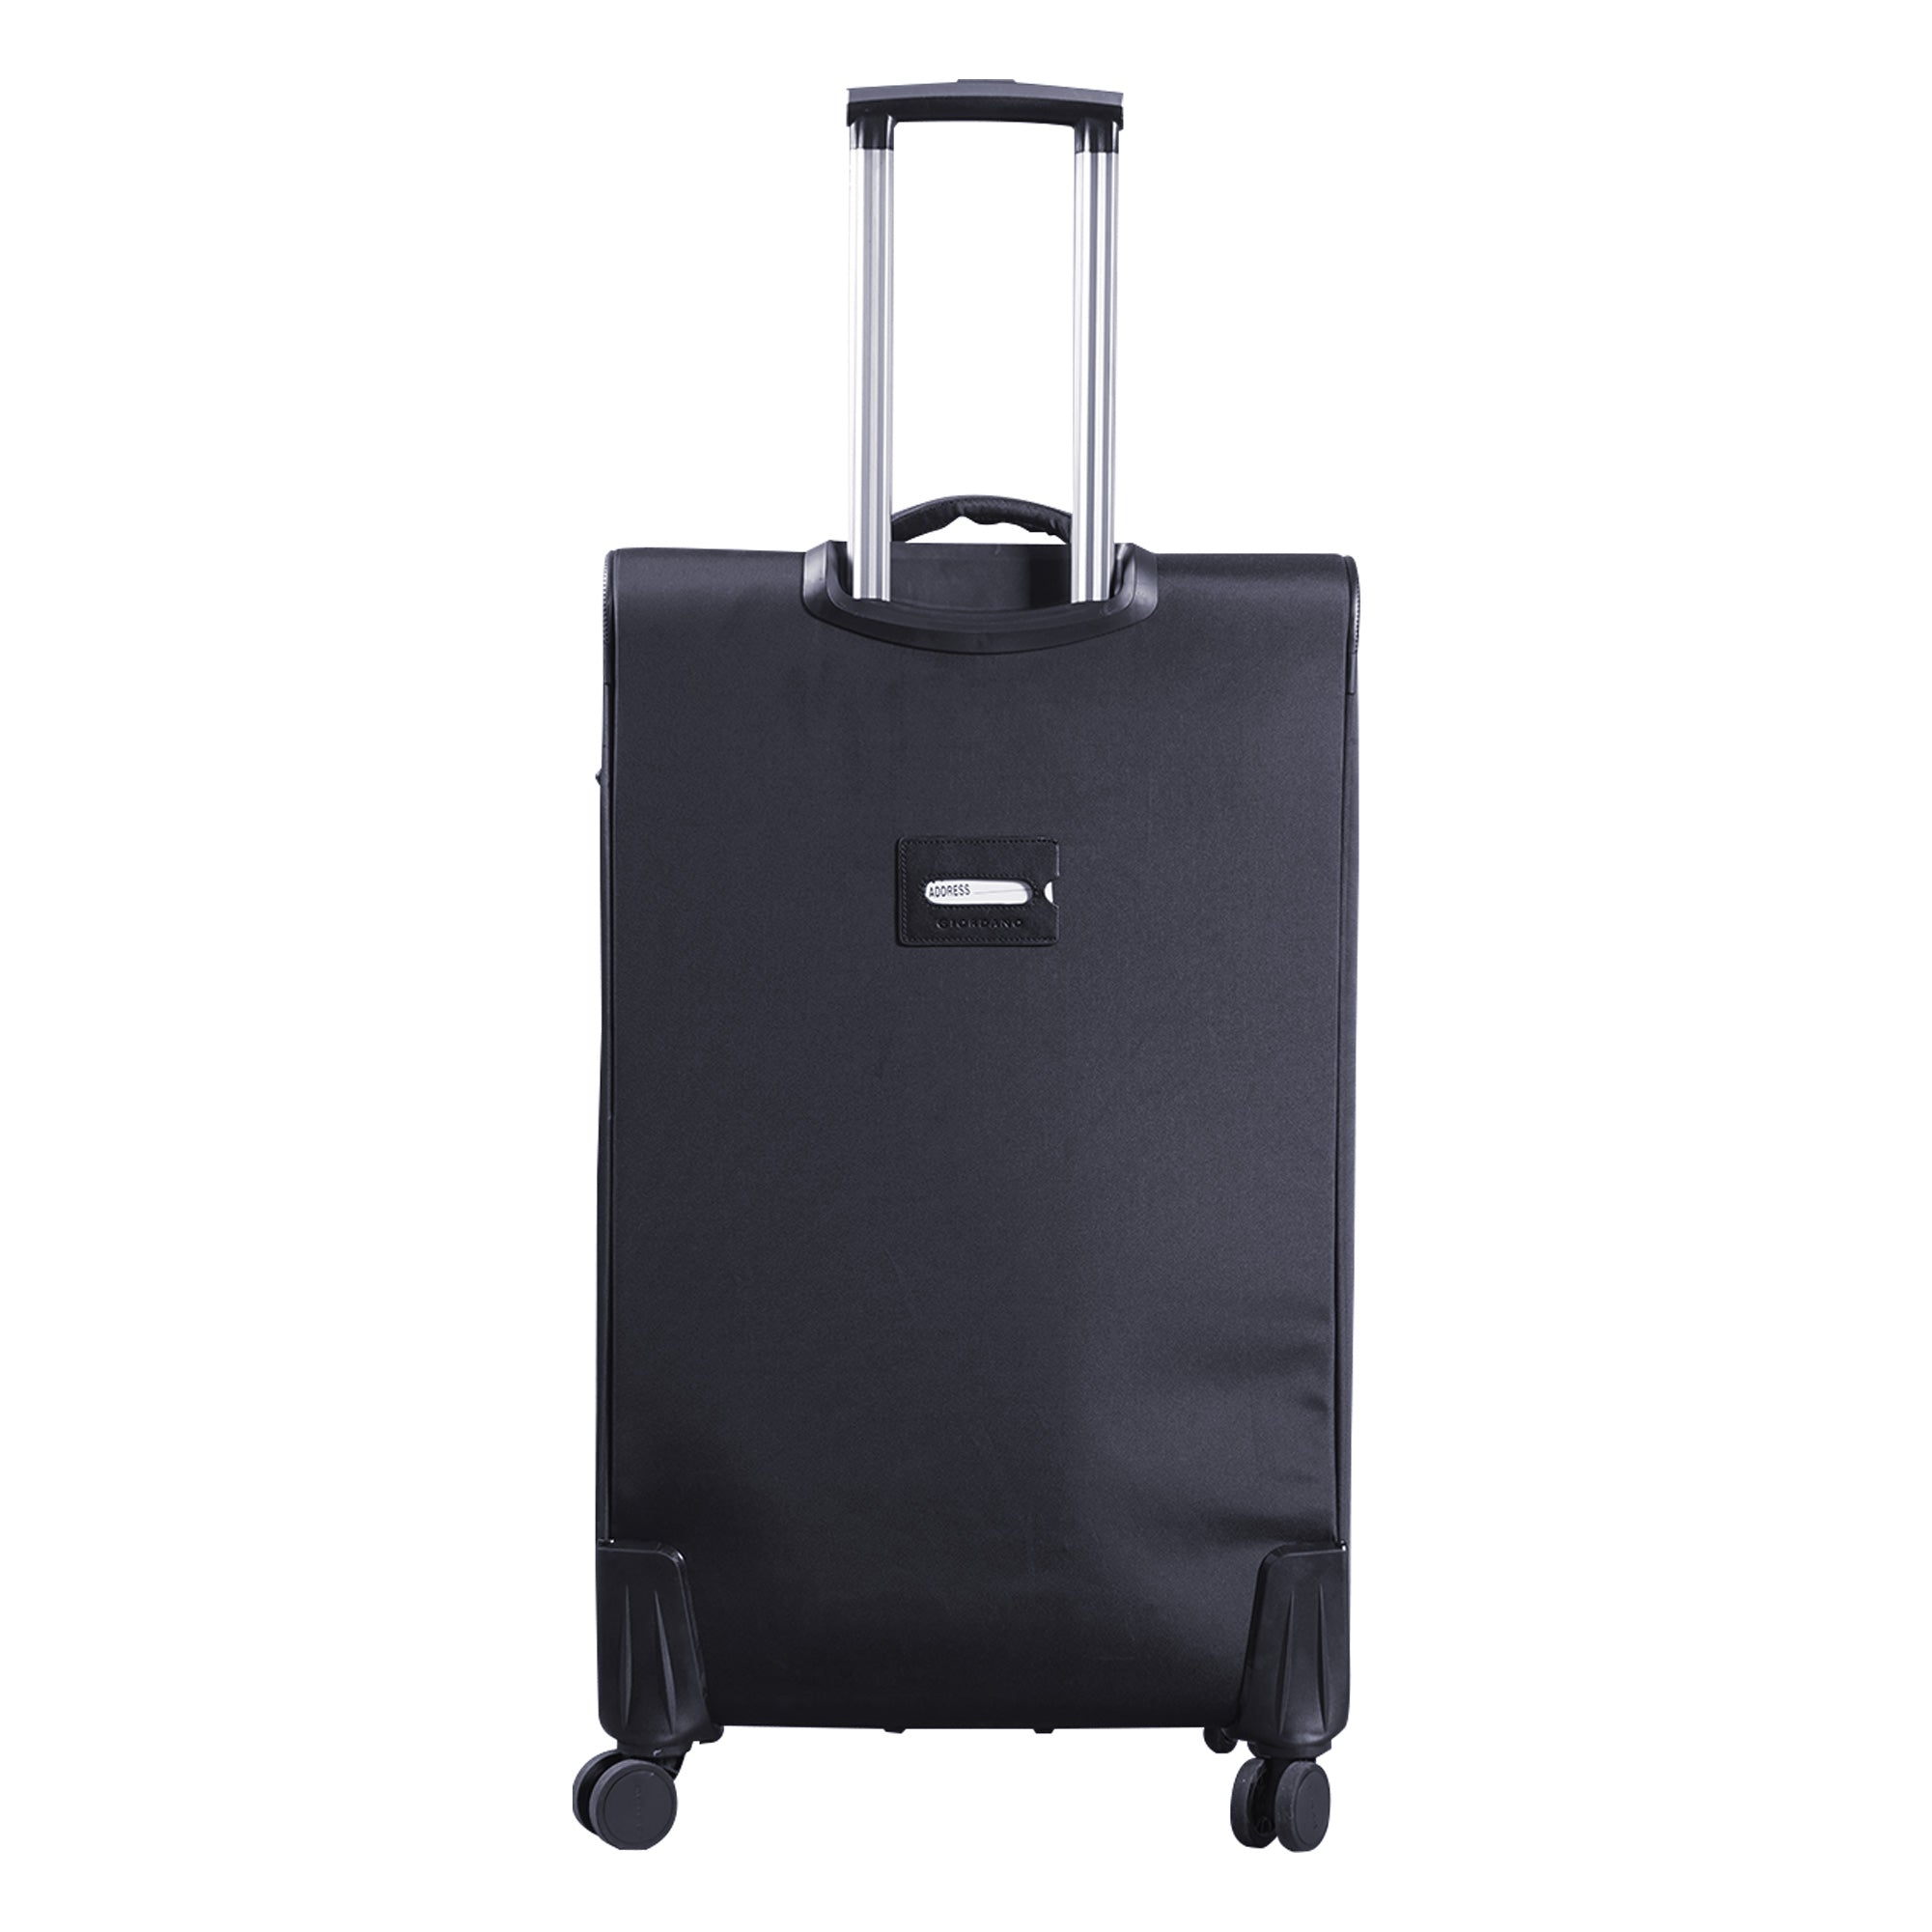 Polyester Luggage